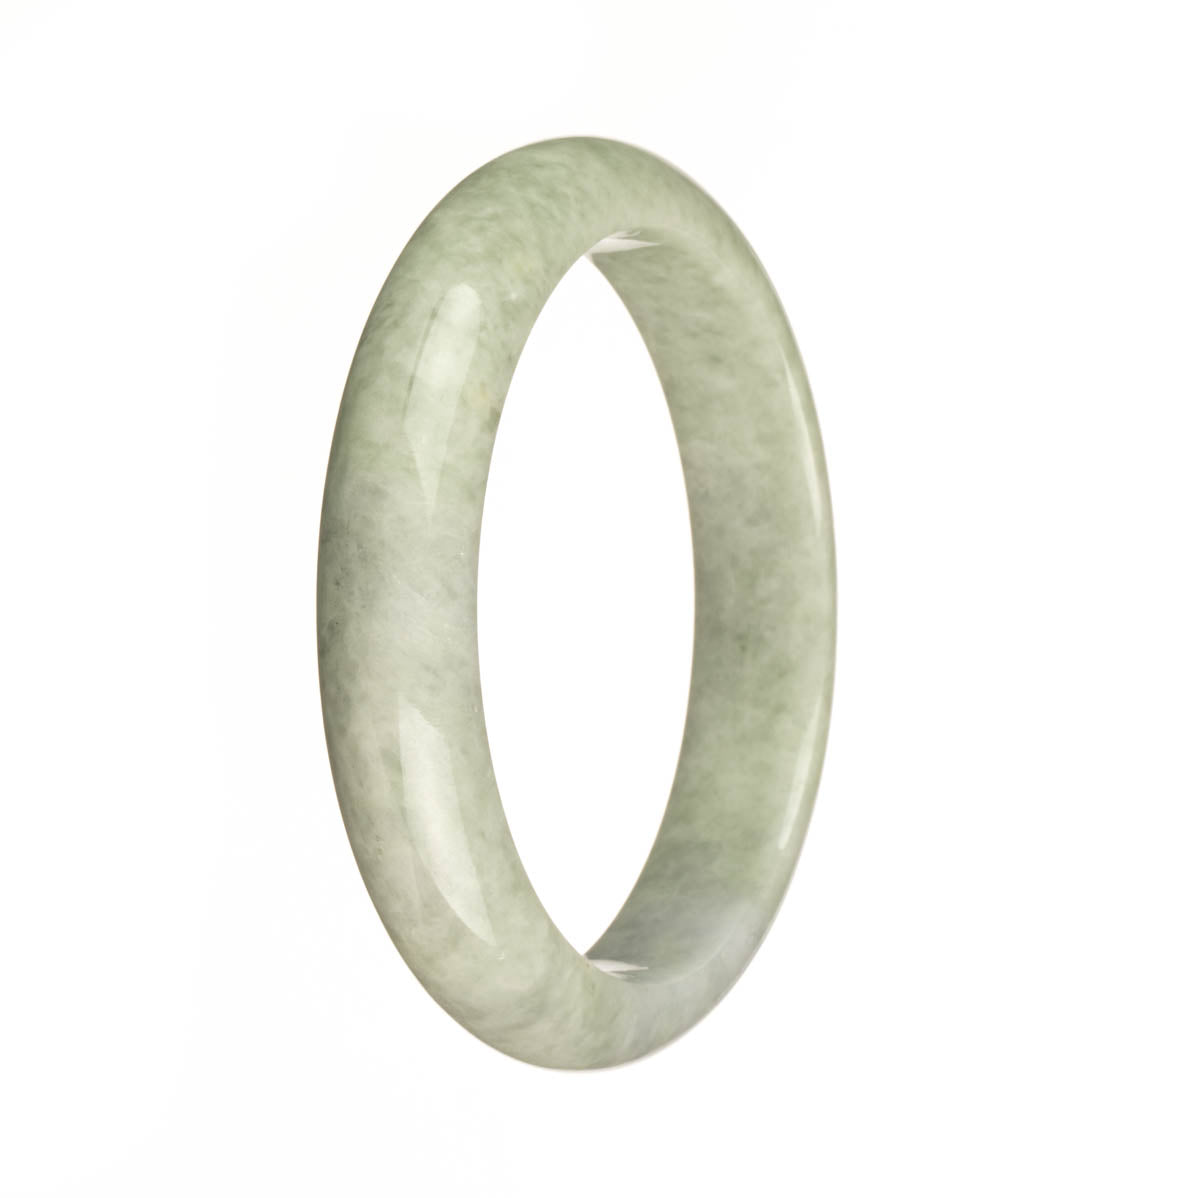 A half moon shaped bangle bracelet made of genuine untreated green Burmese jade with a lavender patch.